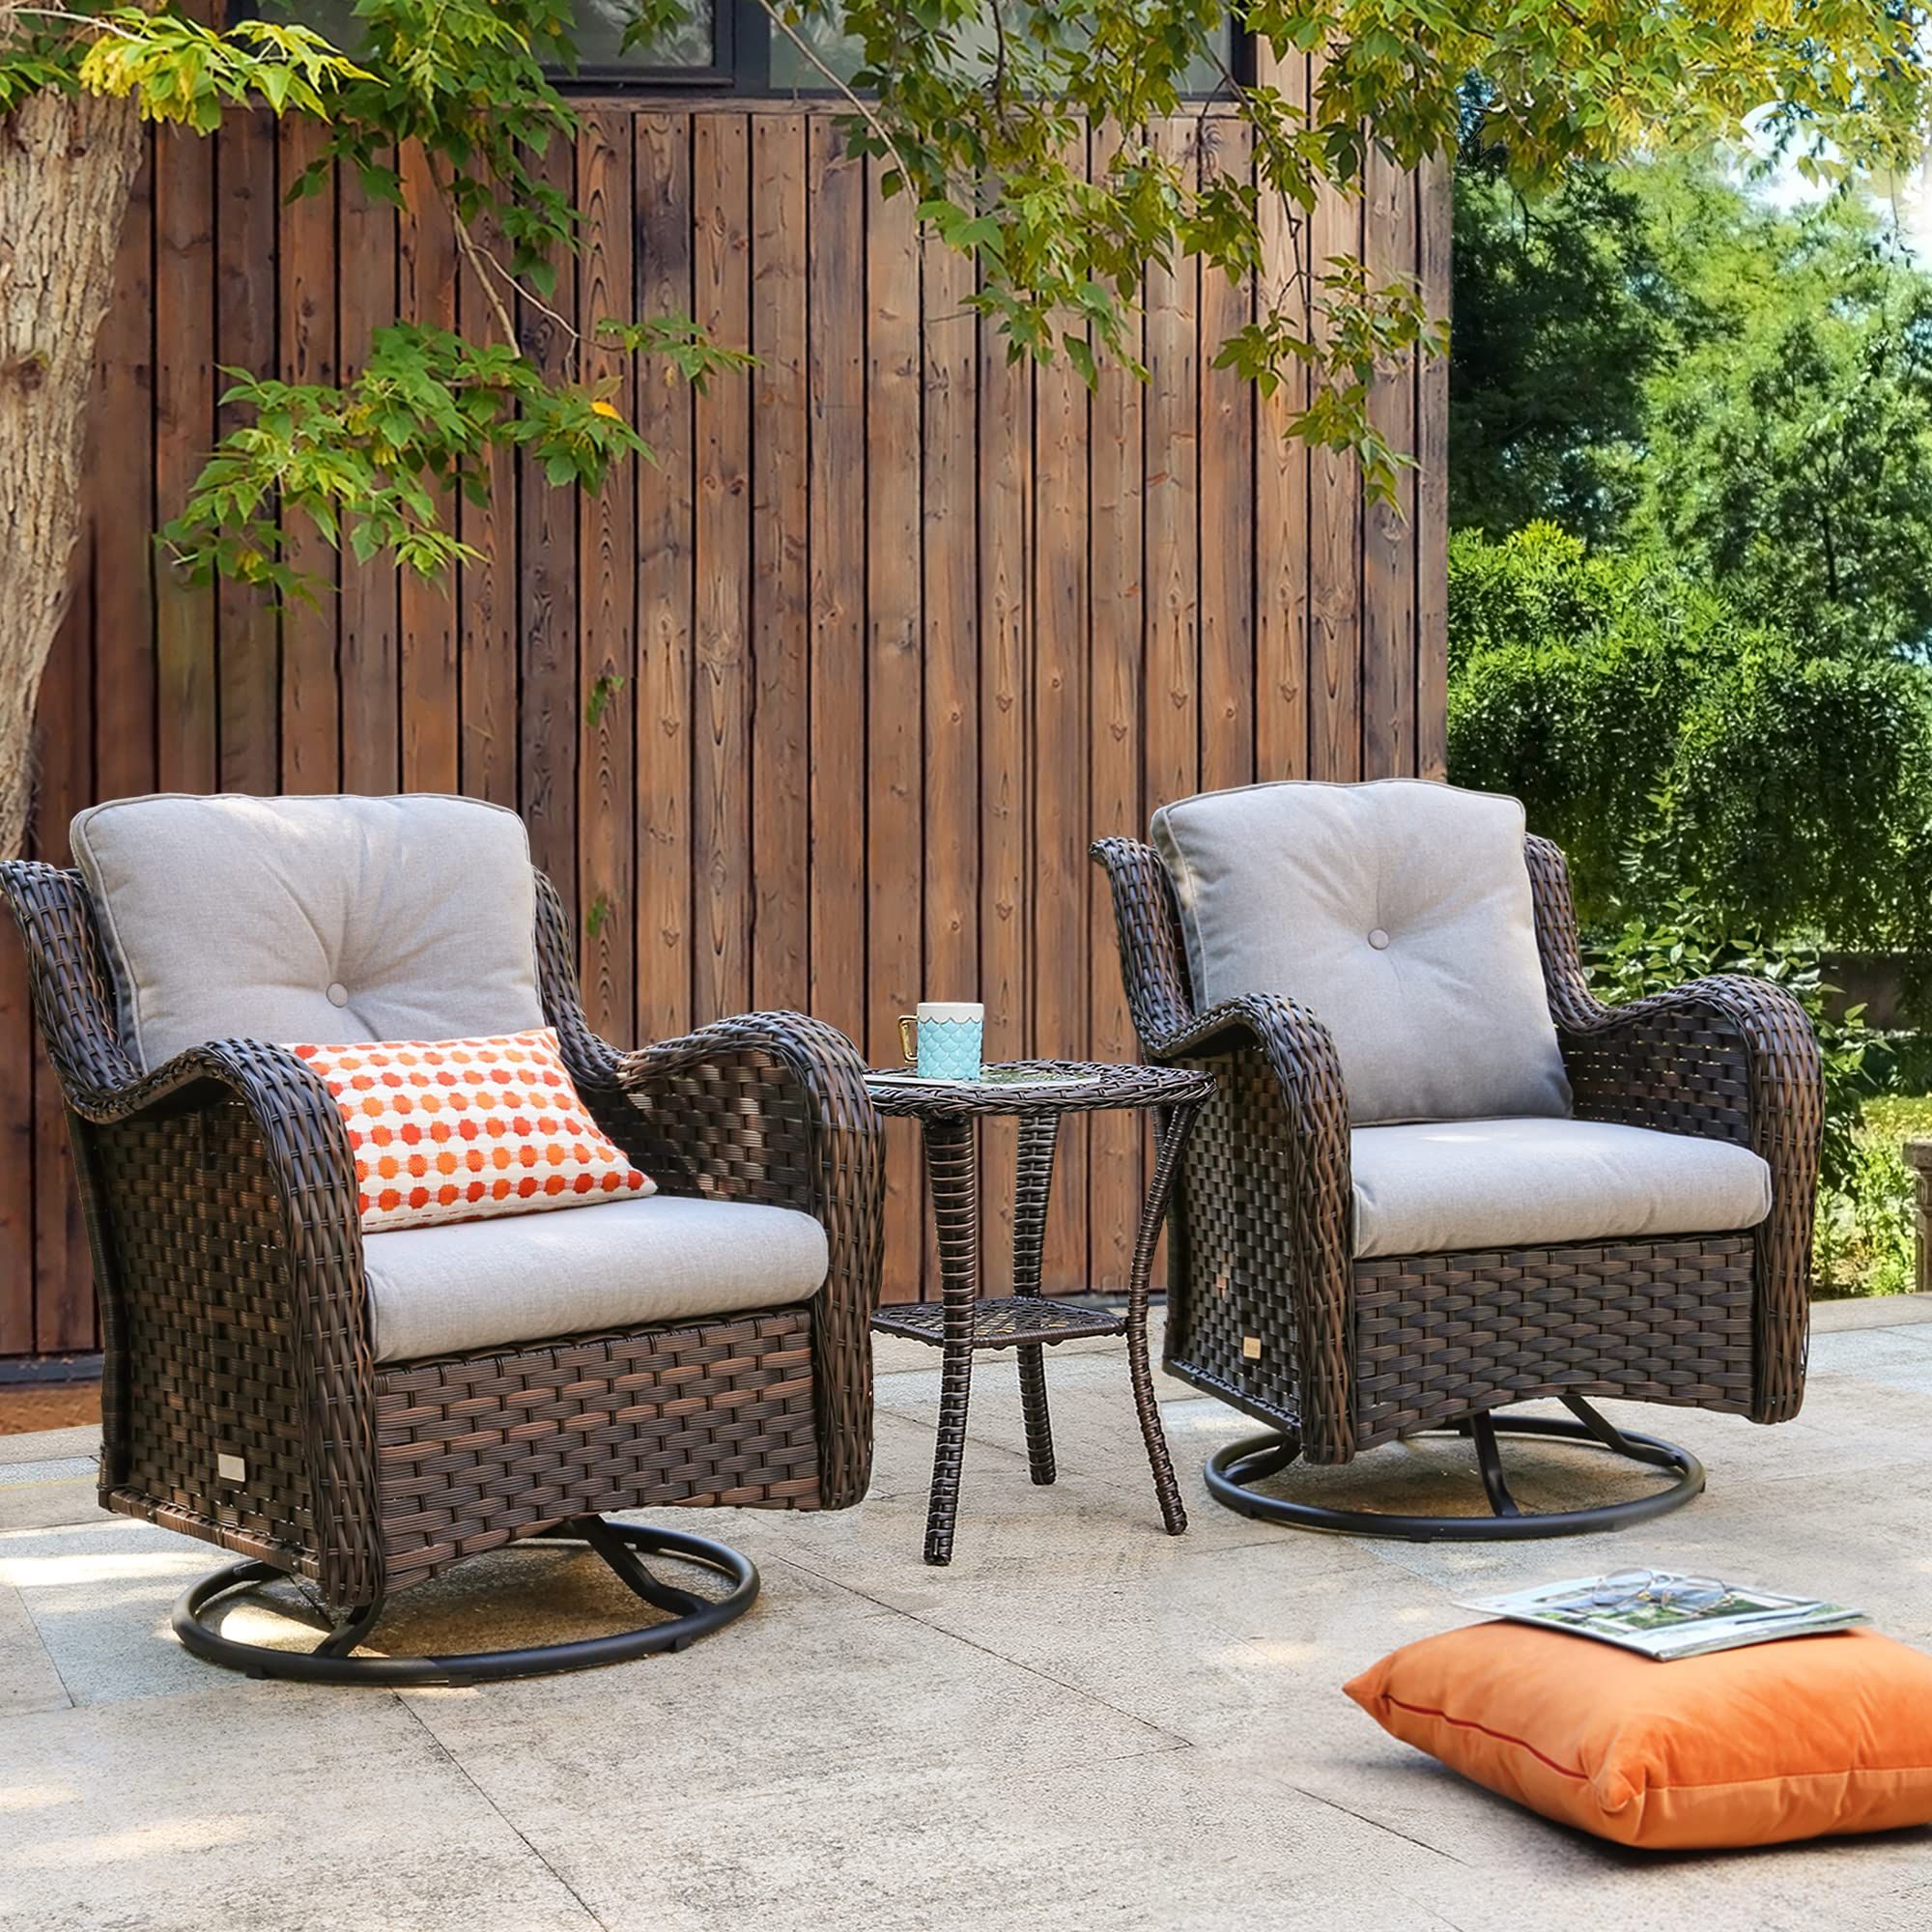 3 Pieces Outdoor Patio Swivel Rocker Set Within Recent Amazon: Haplife 3 Pieces Patio Bistro Set Wicker Swivel Chairs With  Side Table Rattan Outdoor Furniture Rocking Chair Set (dark Brown) : Patio,  Lawn & Garden (View 12 of 15)